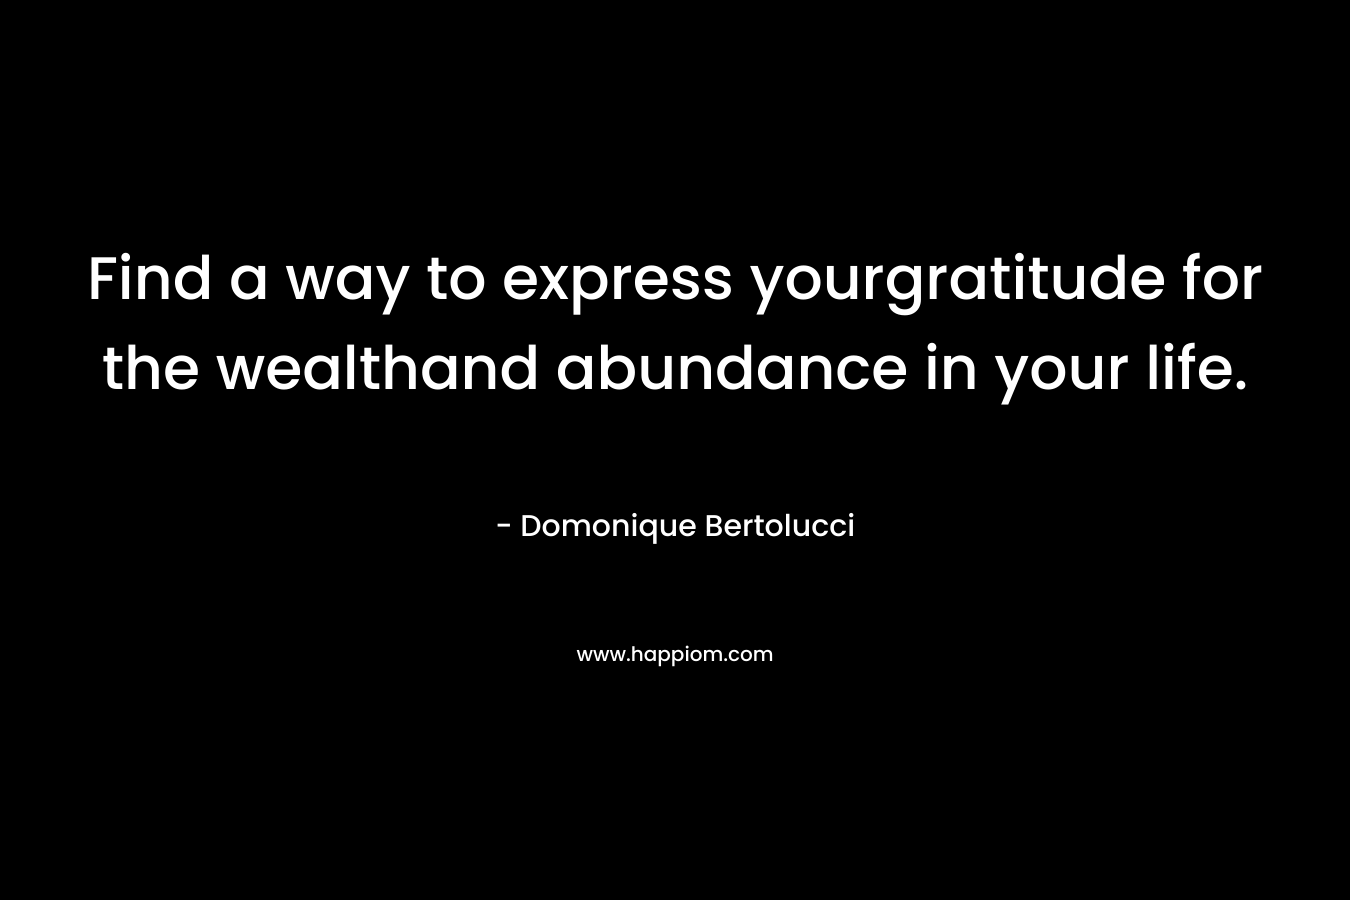 Find a way to express yourgratitude for the wealthand abundance in your life. – Domonique Bertolucci